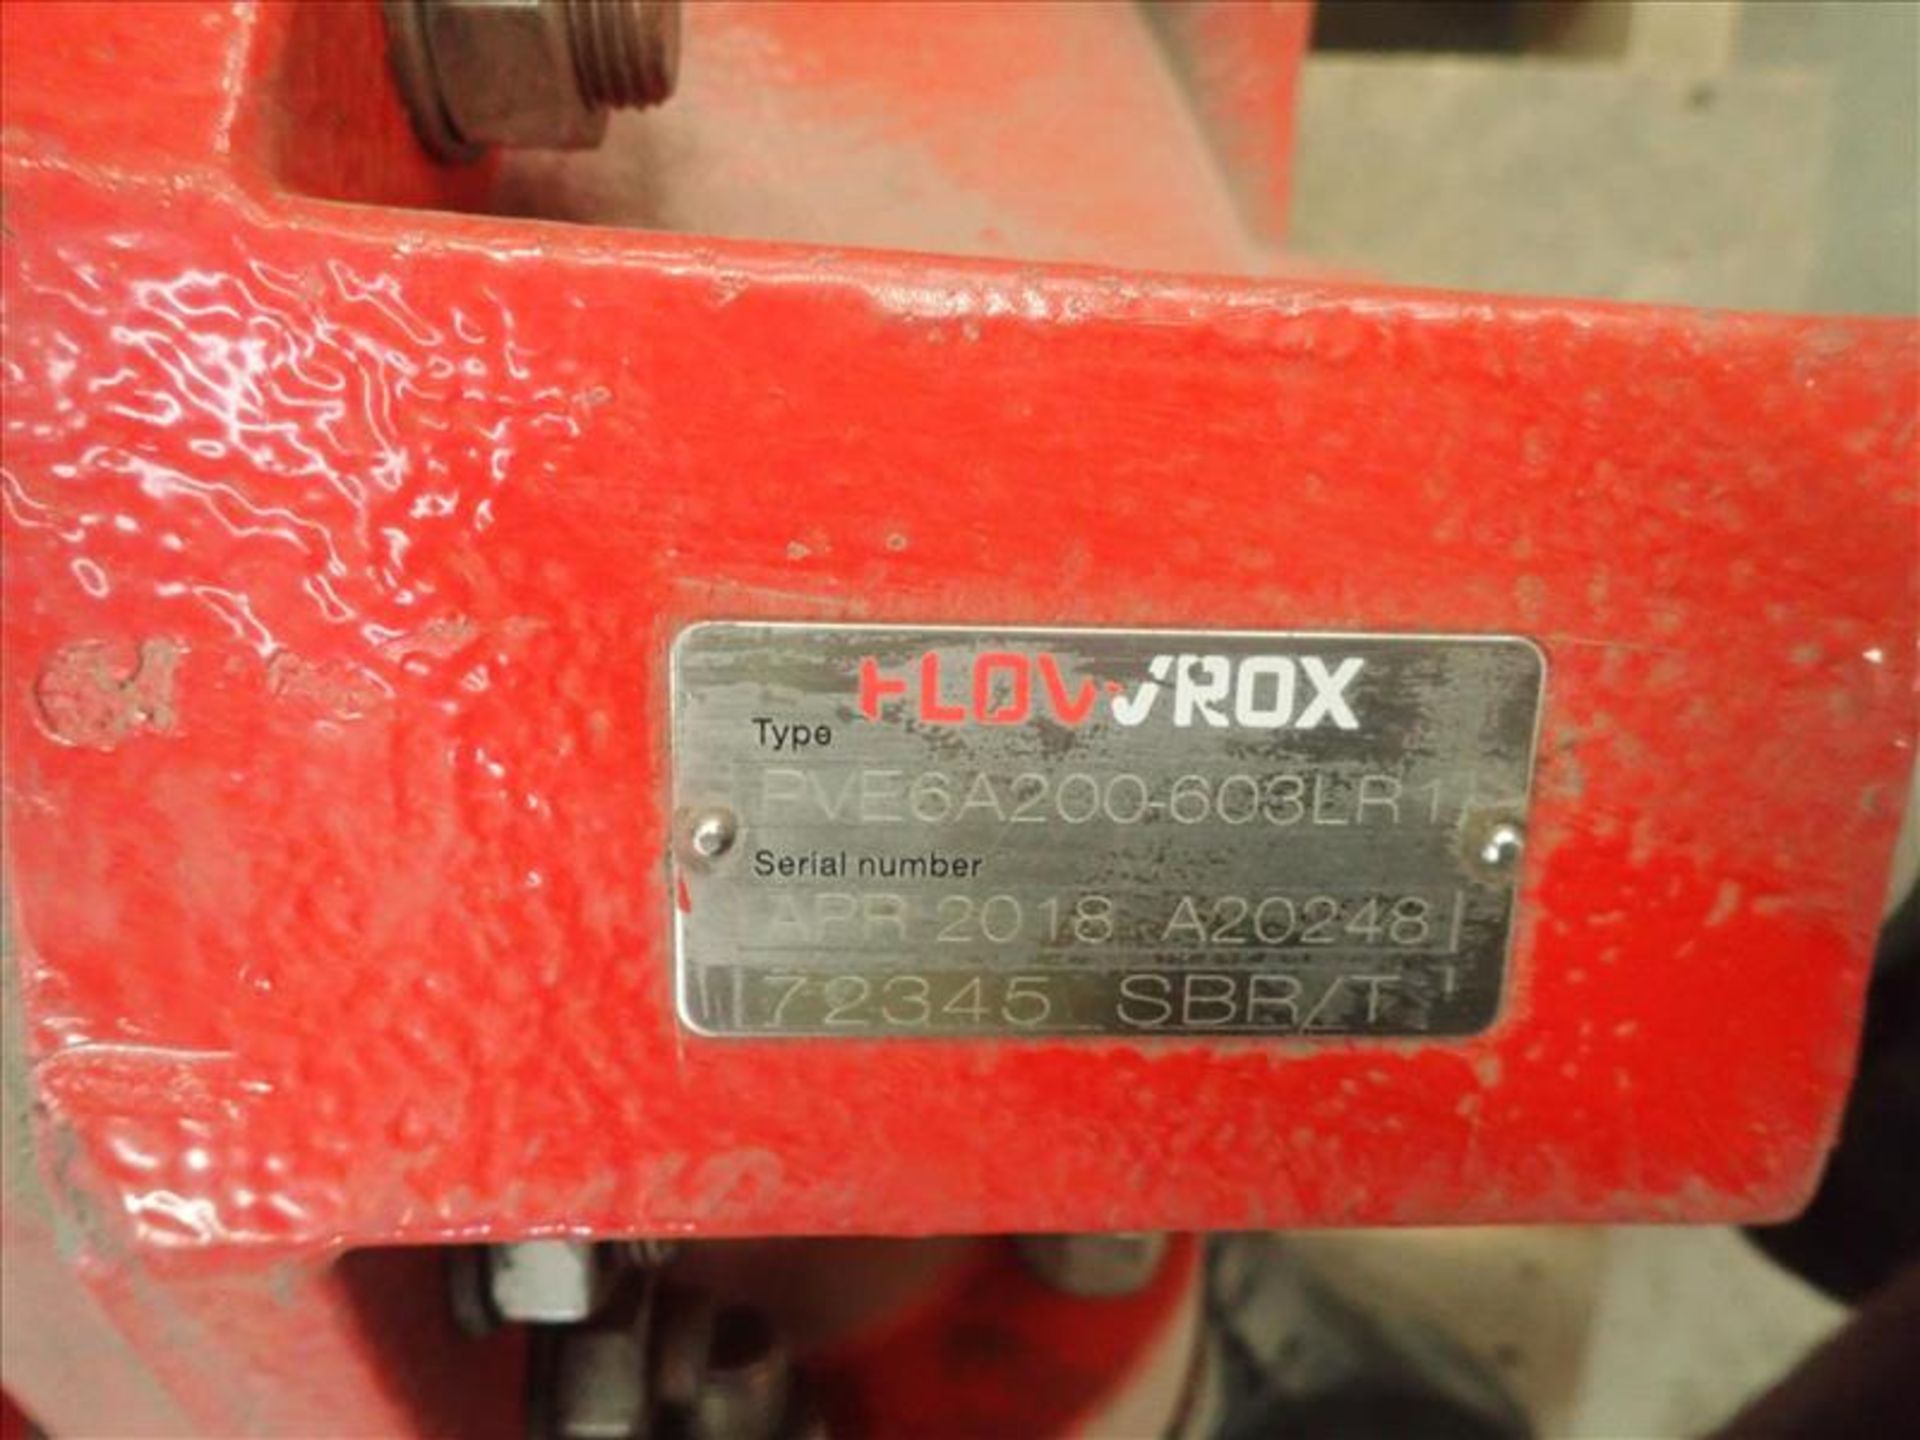 FlowWorx actuated pinch valve, mod. PVE6A200-603LR1, 6 in. dia. (Tag 8945 Loc WH North) - Image 2 of 2